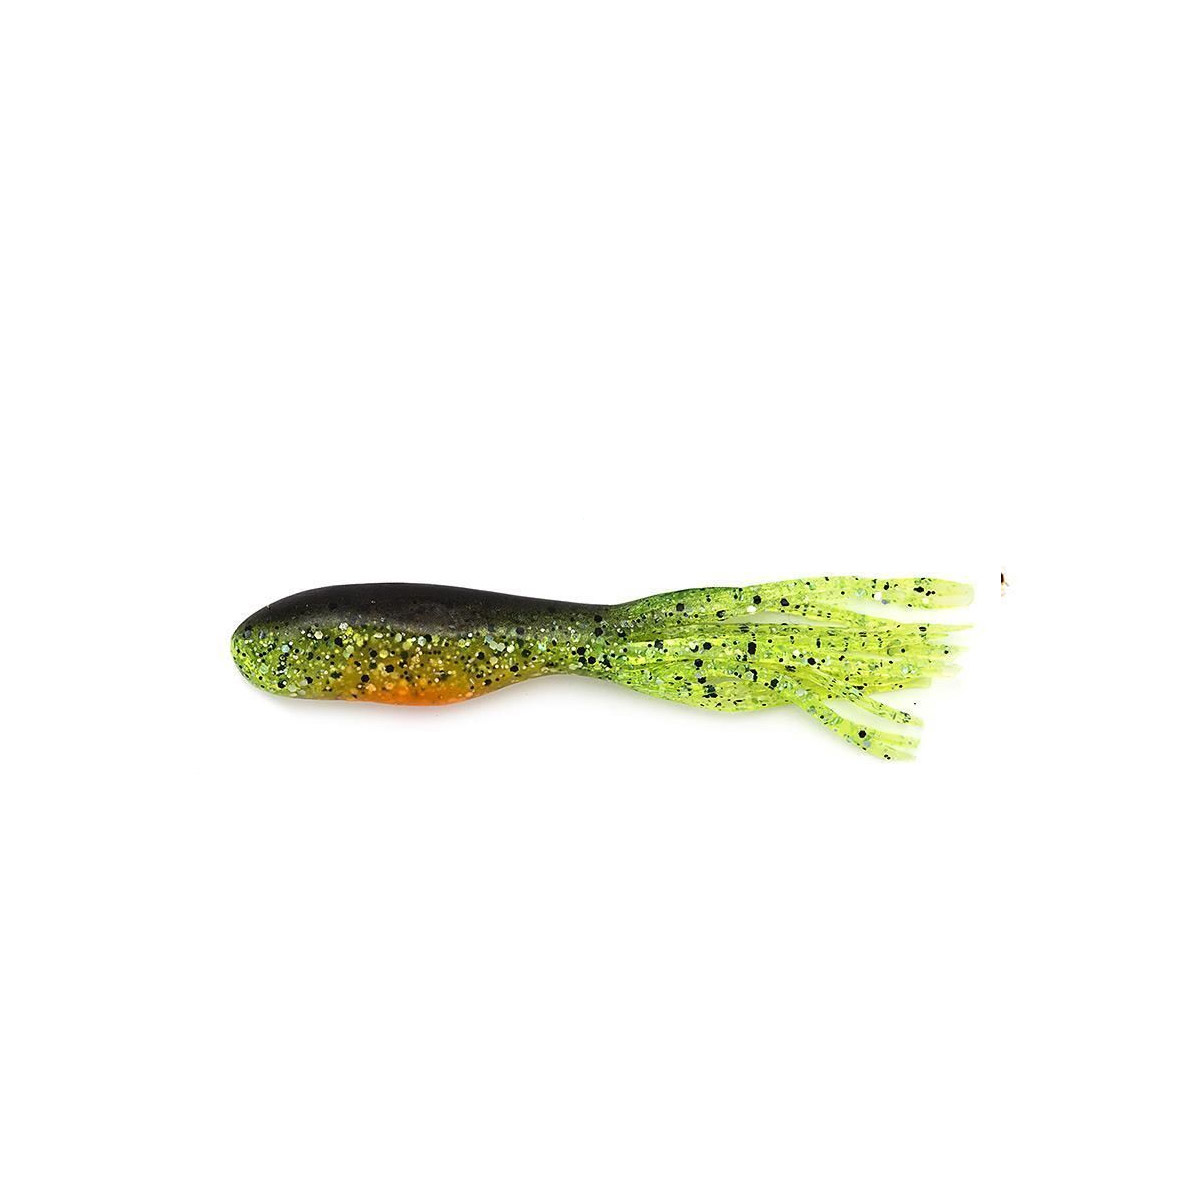 Gitzit Hard Time Minnows 2 Inch  -  Green Chartreuse Orange Belly